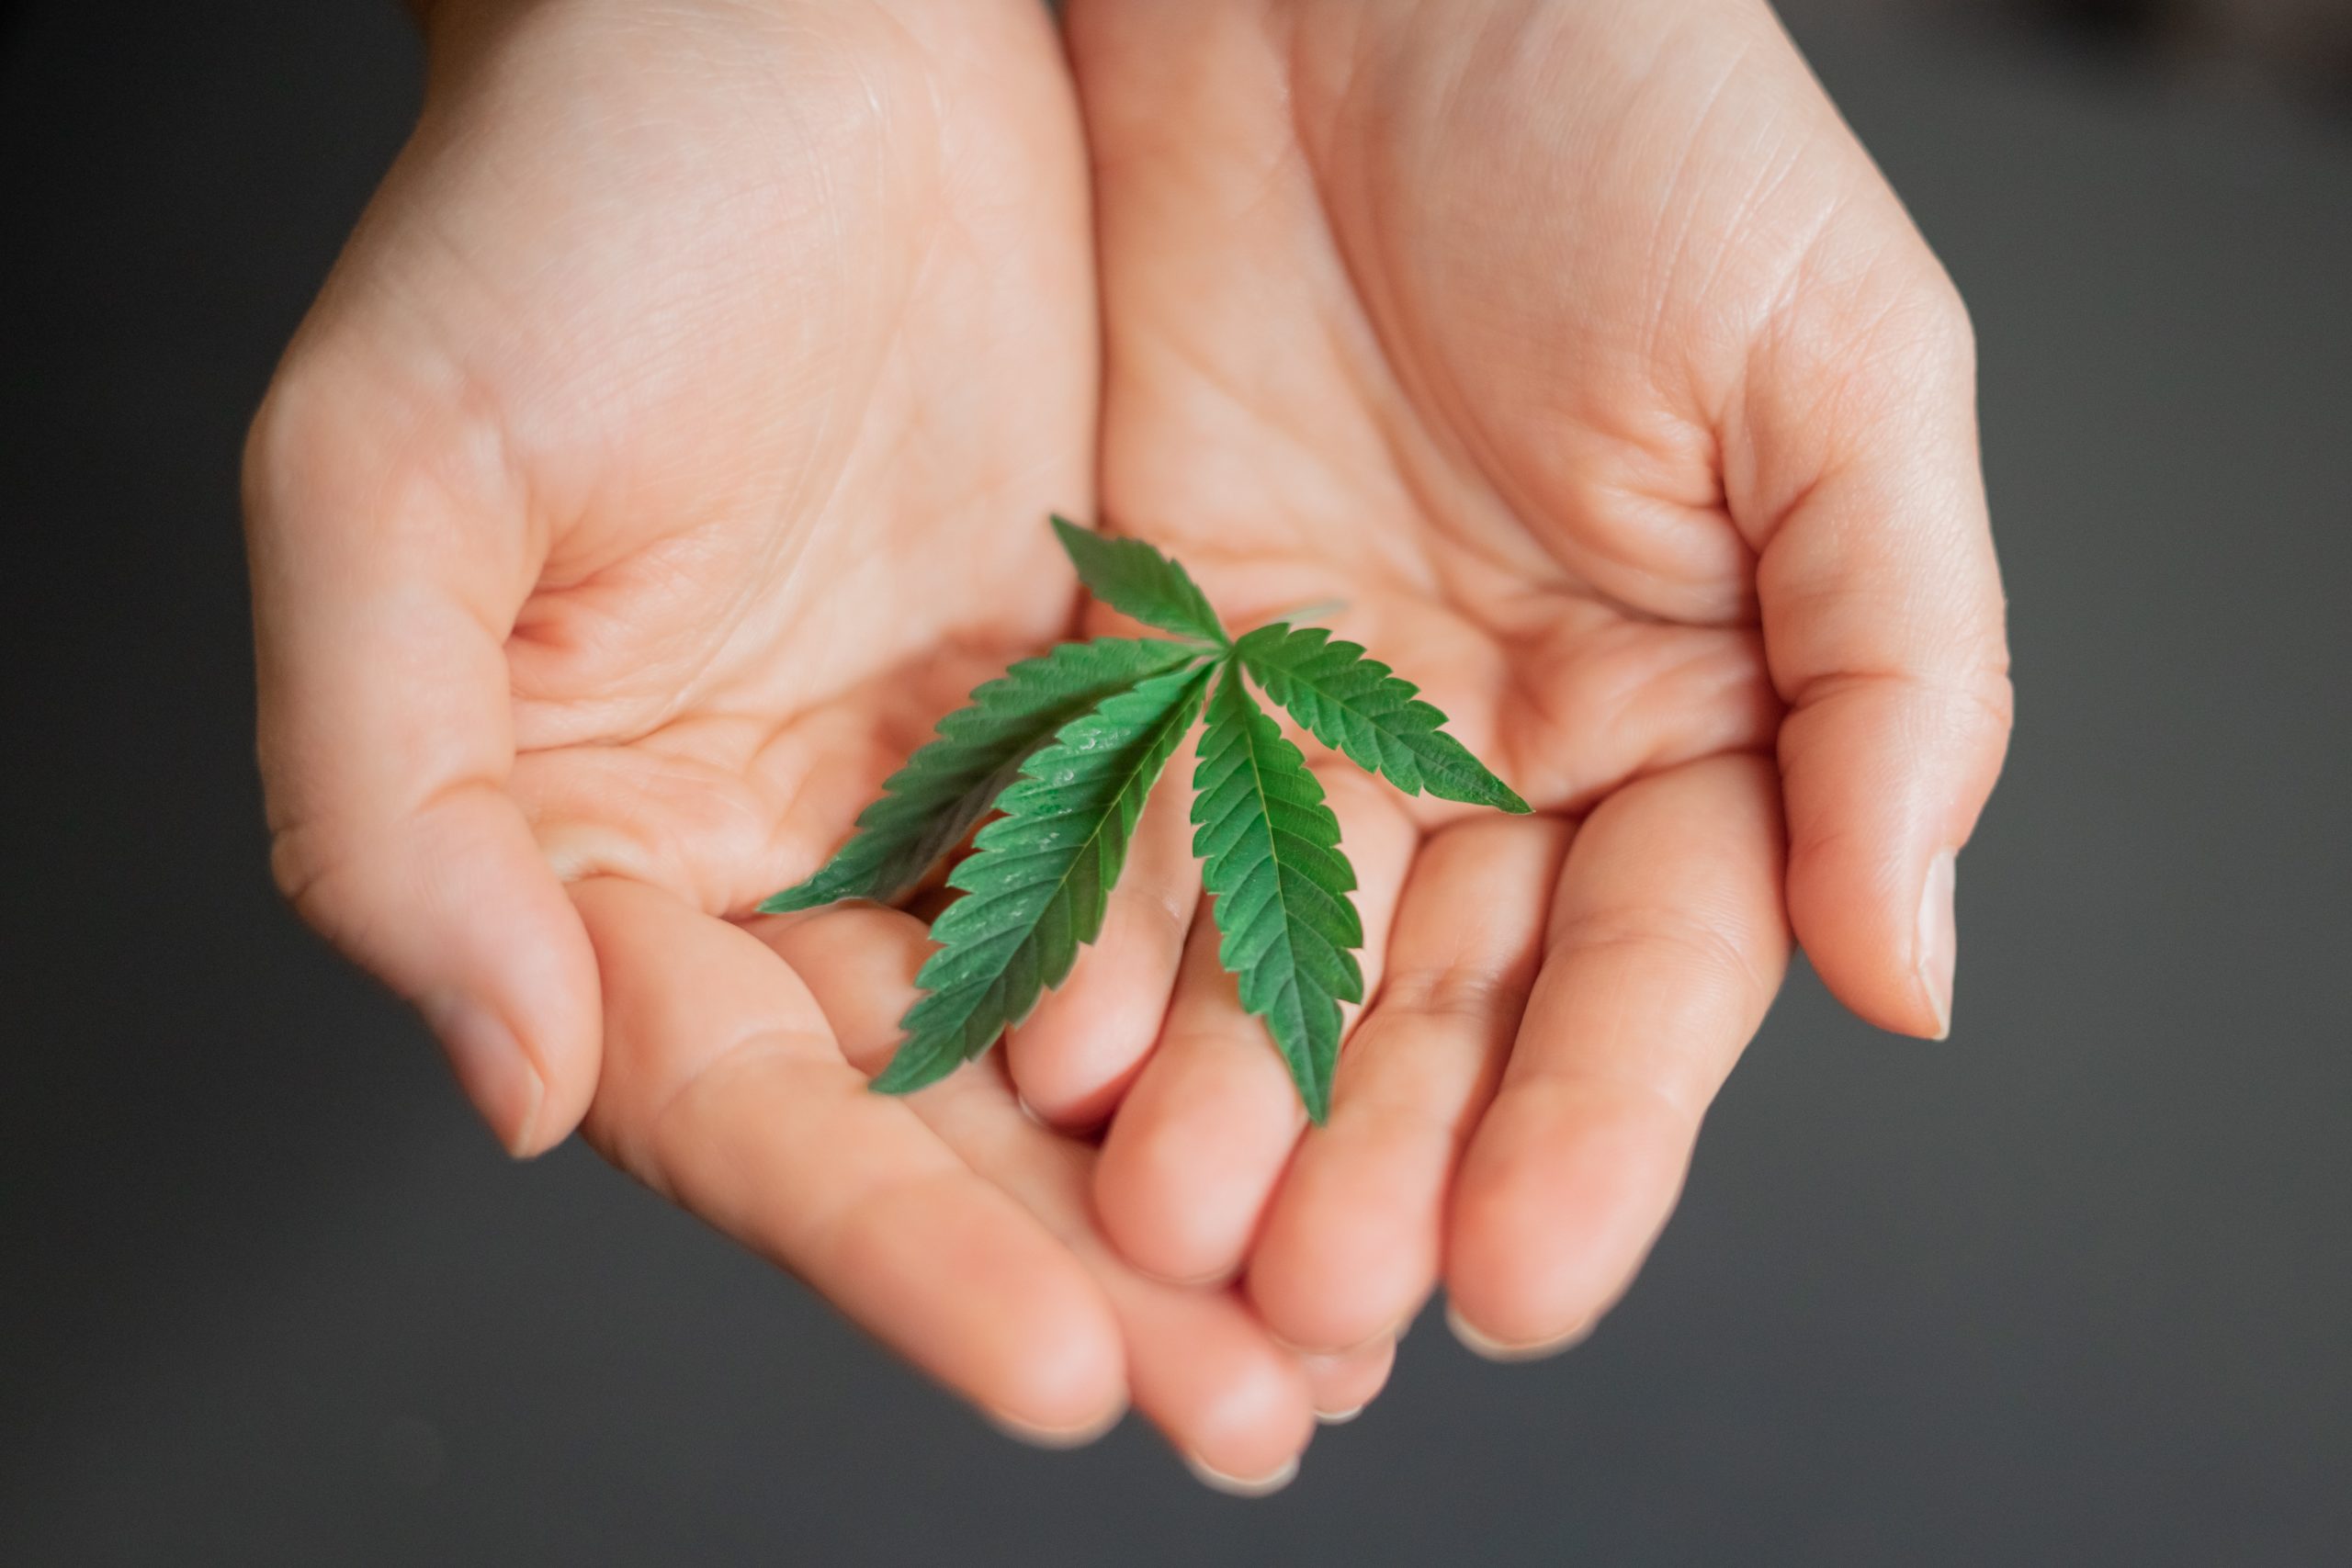 Two hands holding an indica leaf